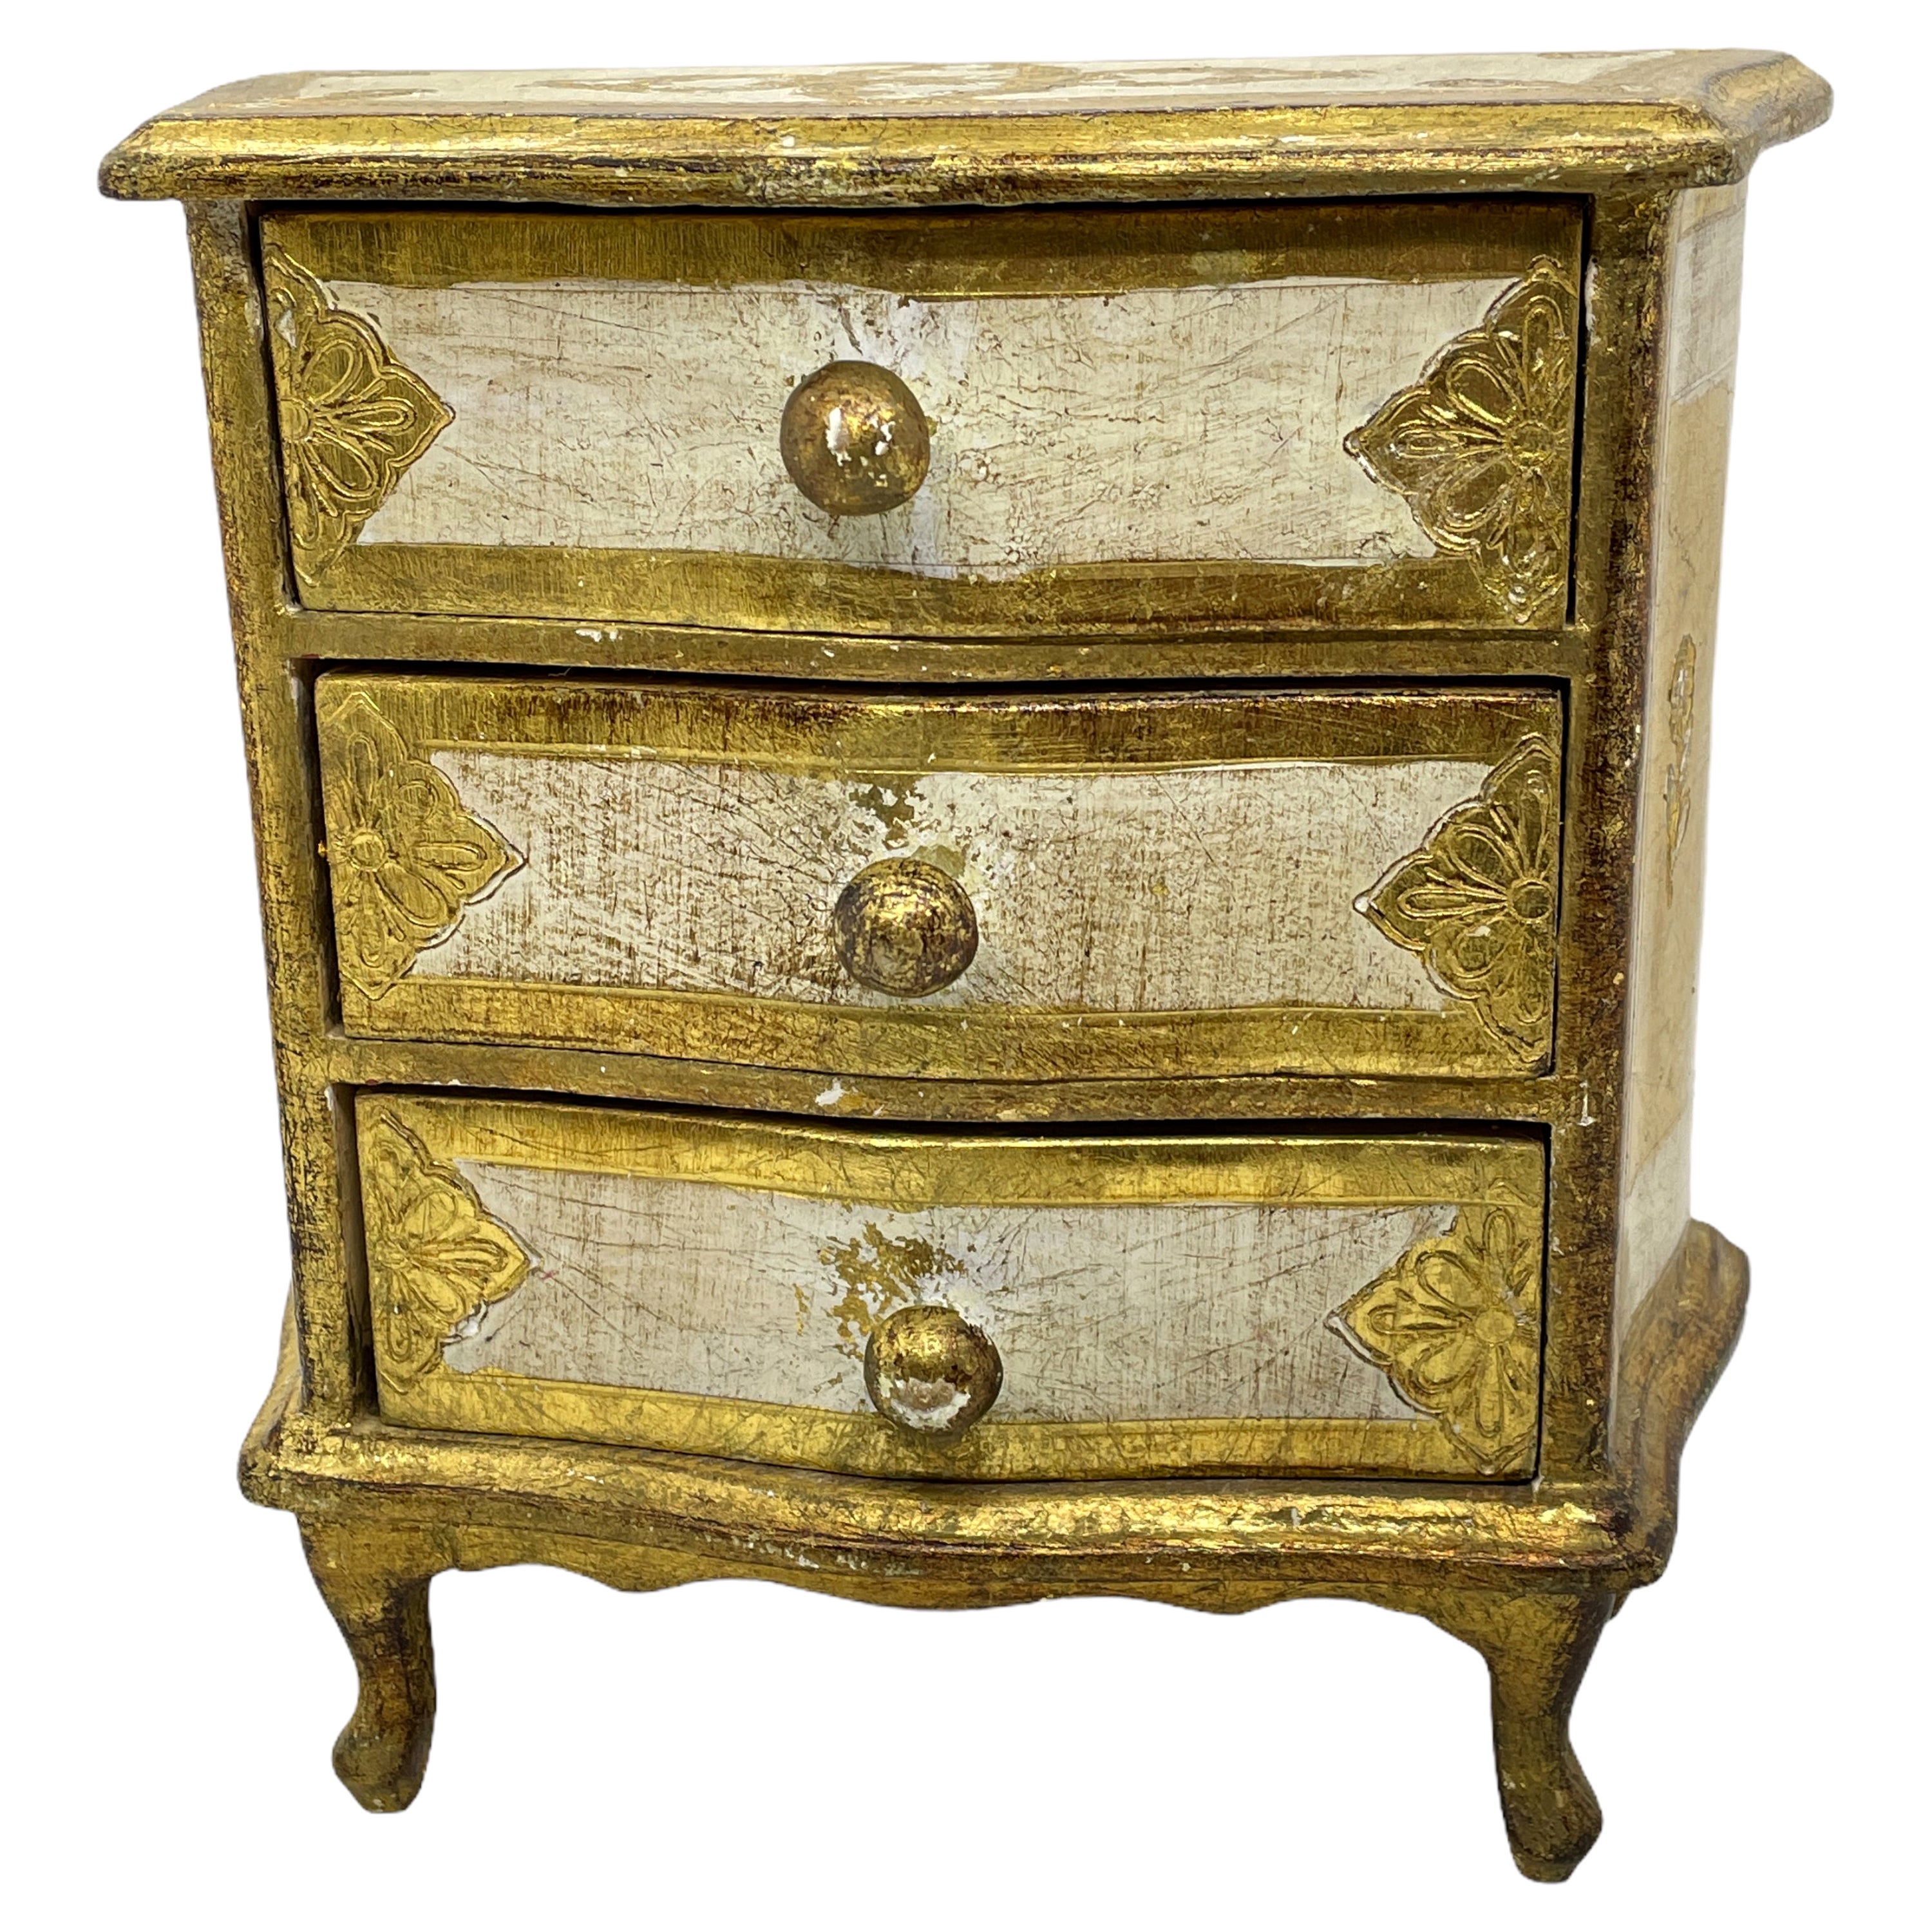 Italian Florentine Giltwood Jewelry Box Chest of Drawers Toleware Tole, 1950s